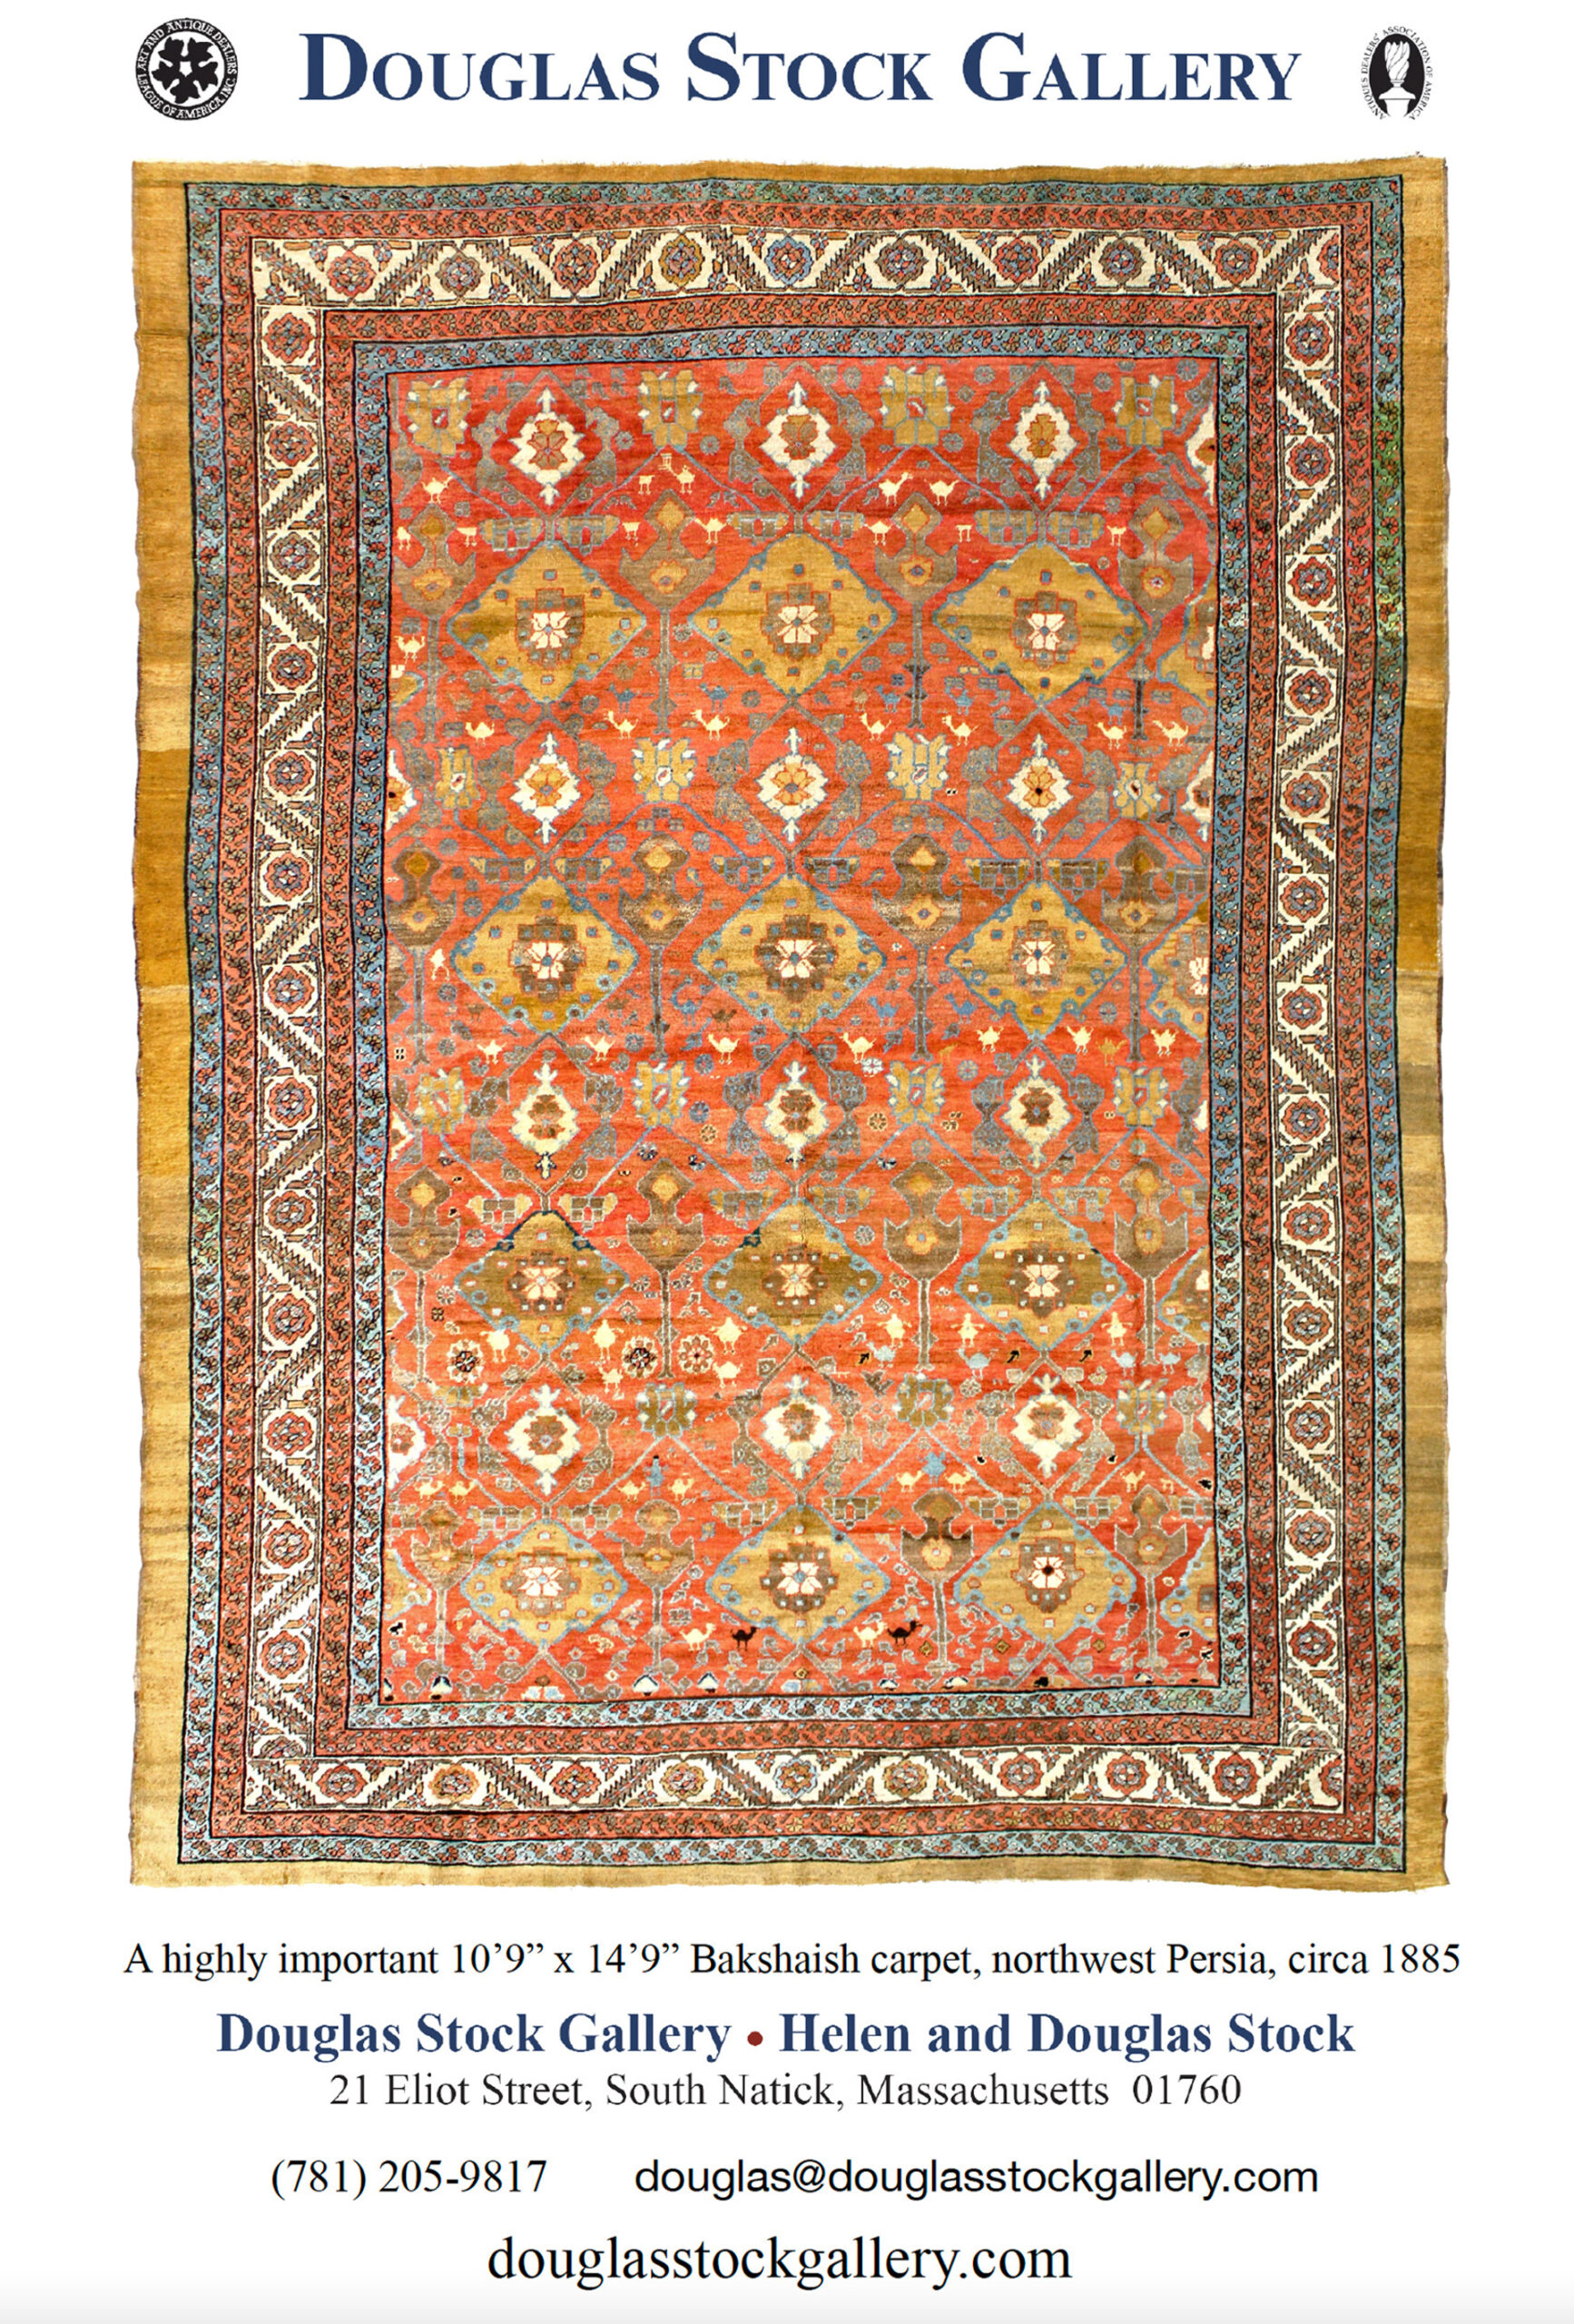 Douglas Stock Gallery advertisement for an antique Persian Bakshaish carpet in the January 2022 issue of The Magazine Antiques